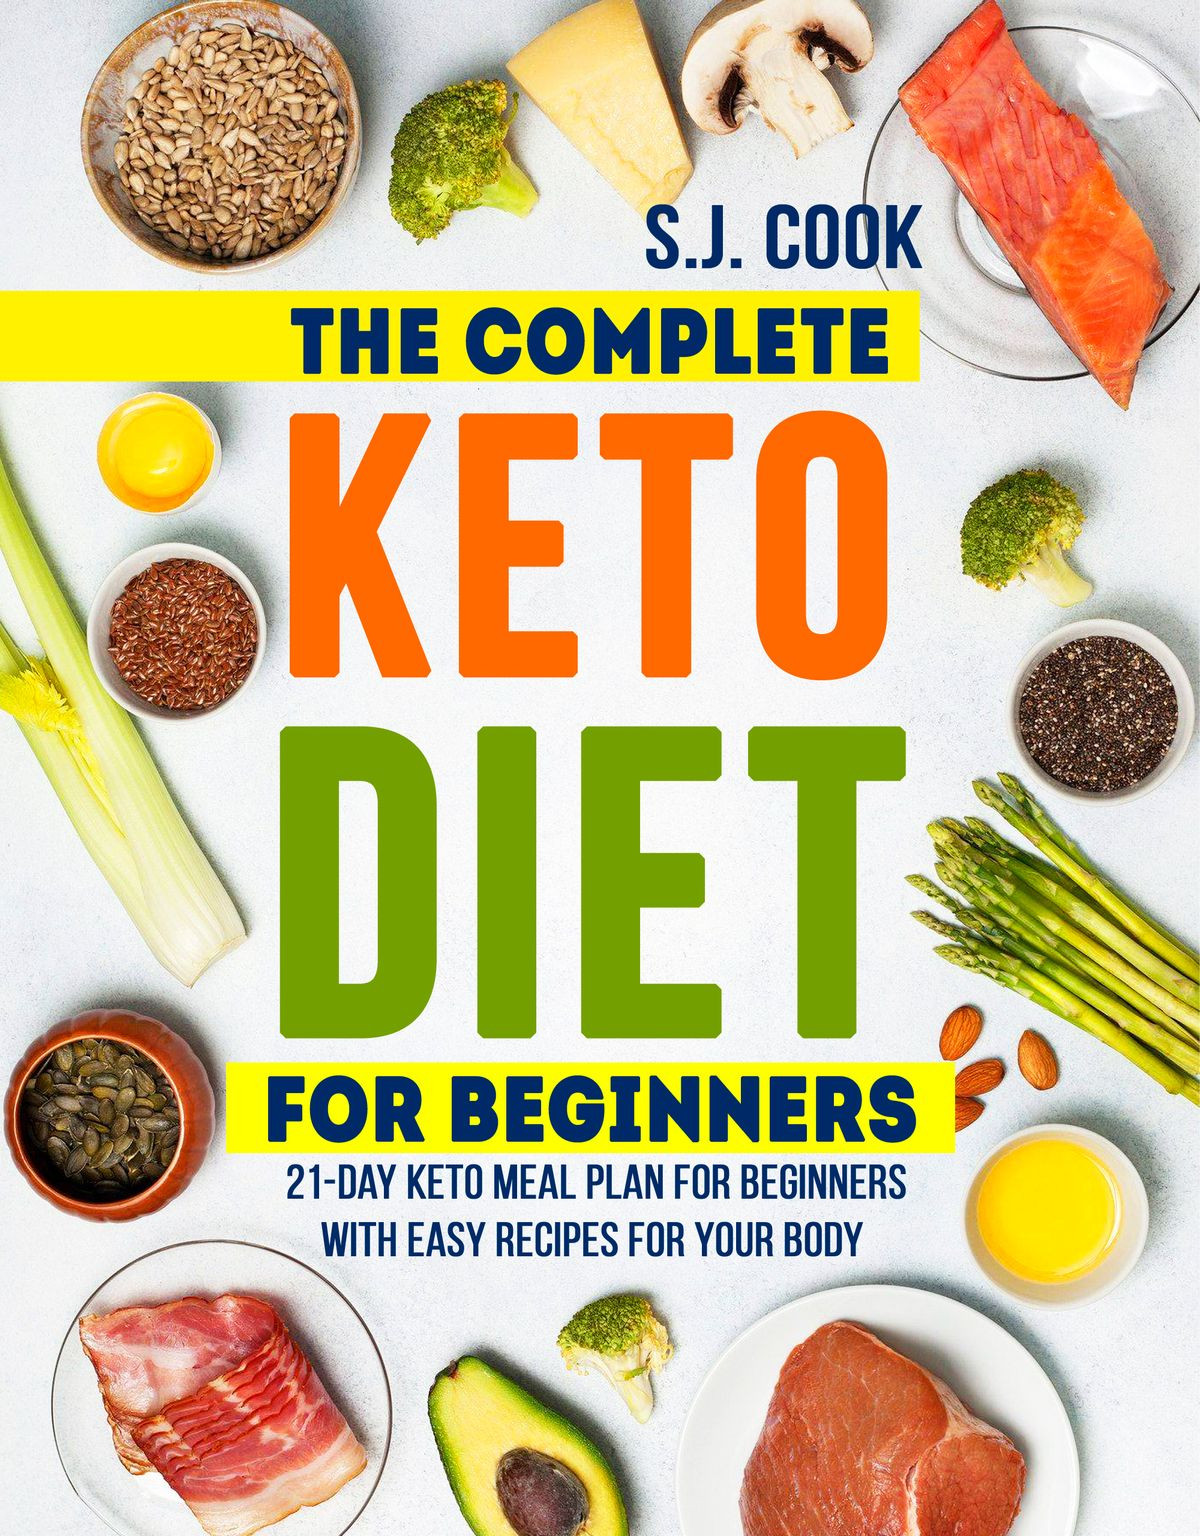 Easy Keto Diet For Weight Loss
 The plete Keto Diet for Beginners 21 Day Keto Meal